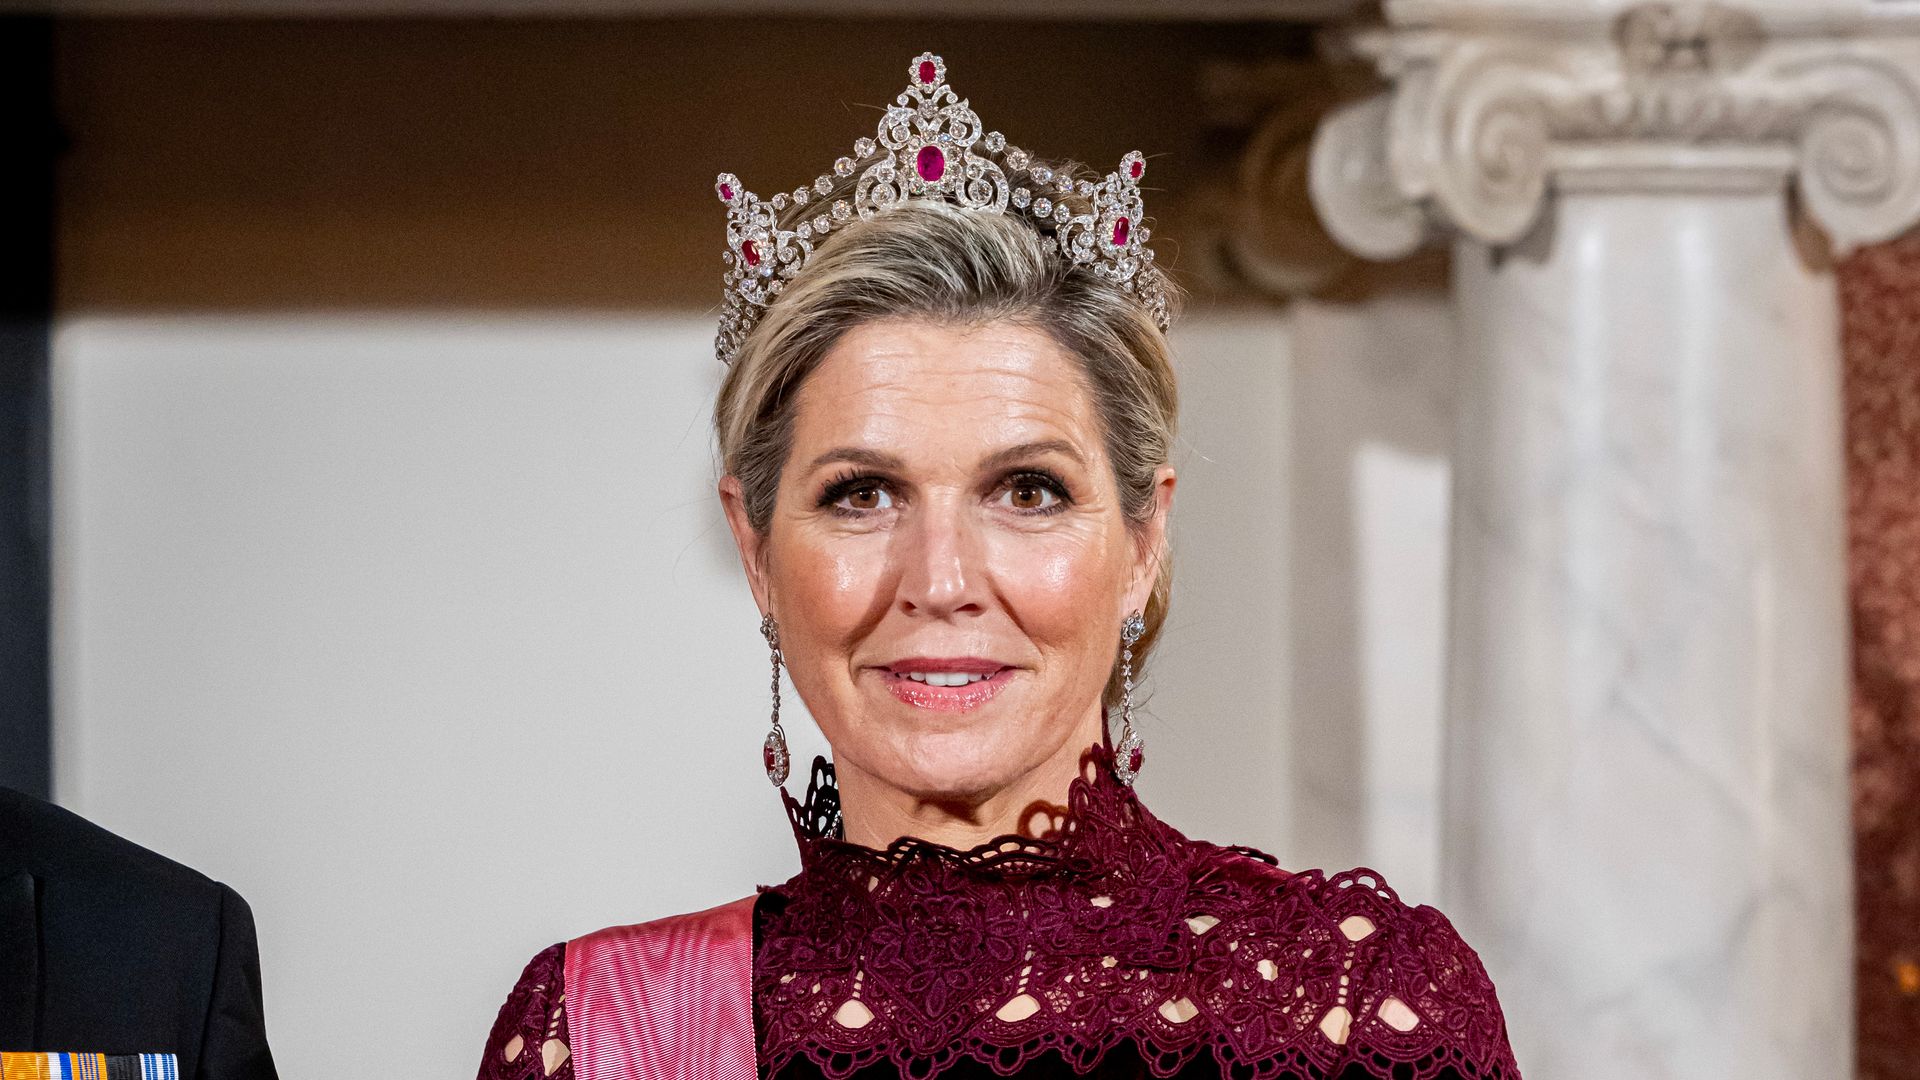 Queen Máxima stuns in ruby ballgown and tiara at state banquet